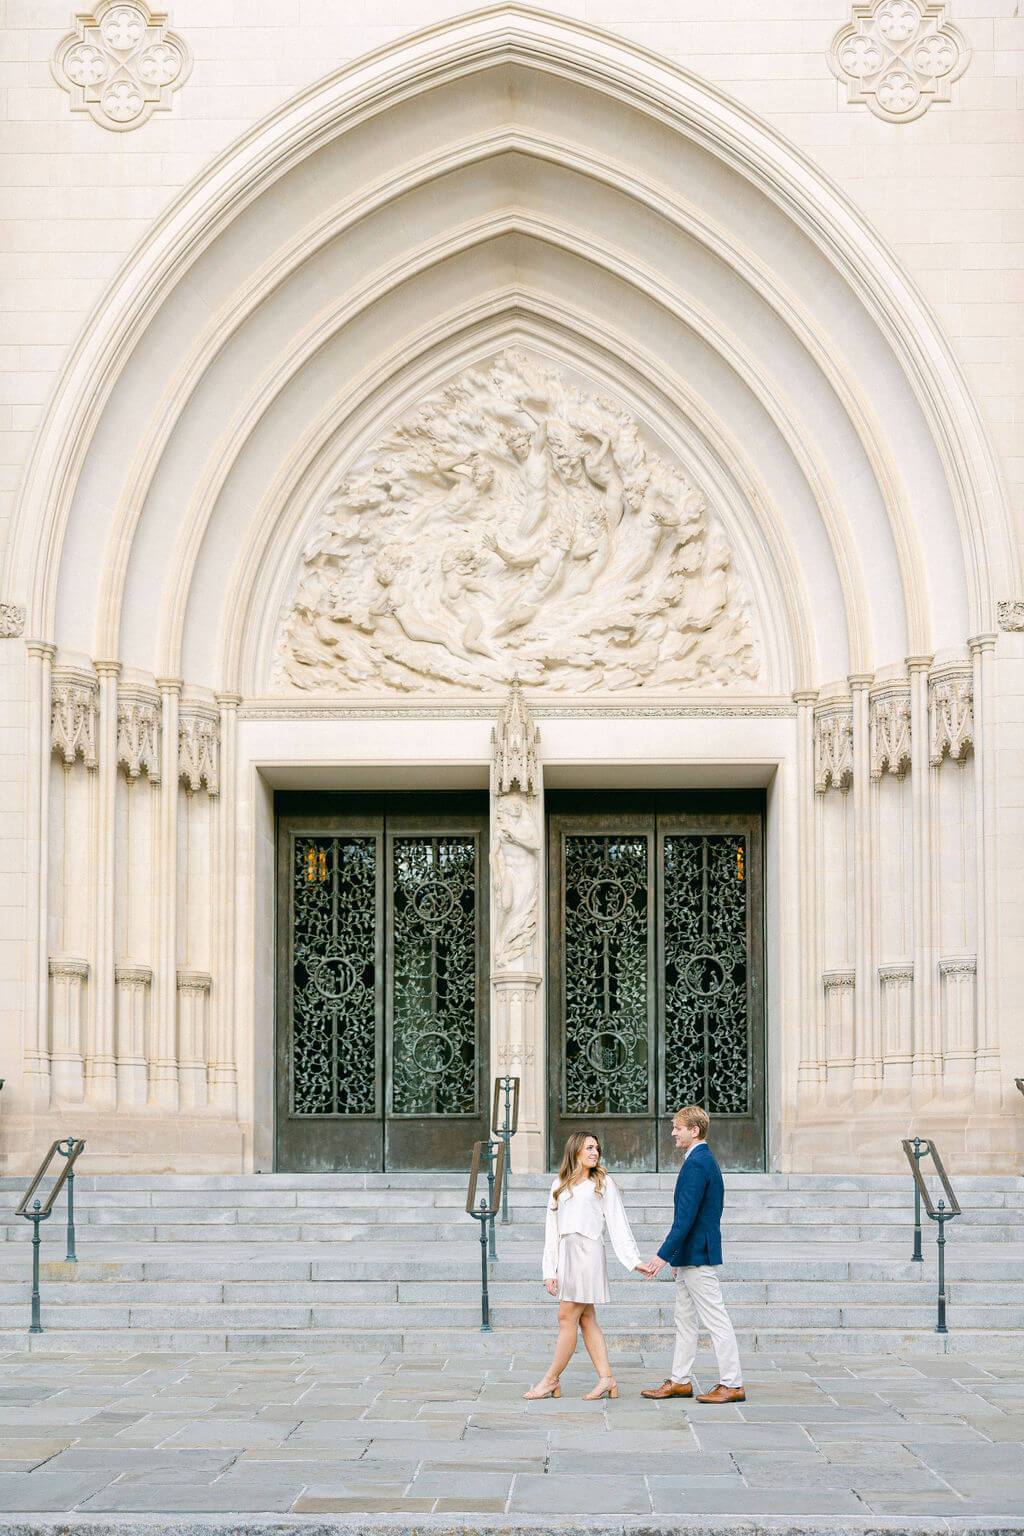 A photo of an engaged couple holding hands in front of the grand entrance of the Washington National Cathedral, with intricate gothic details and a bas-relief above the doors, captured by Get Ready Photo.